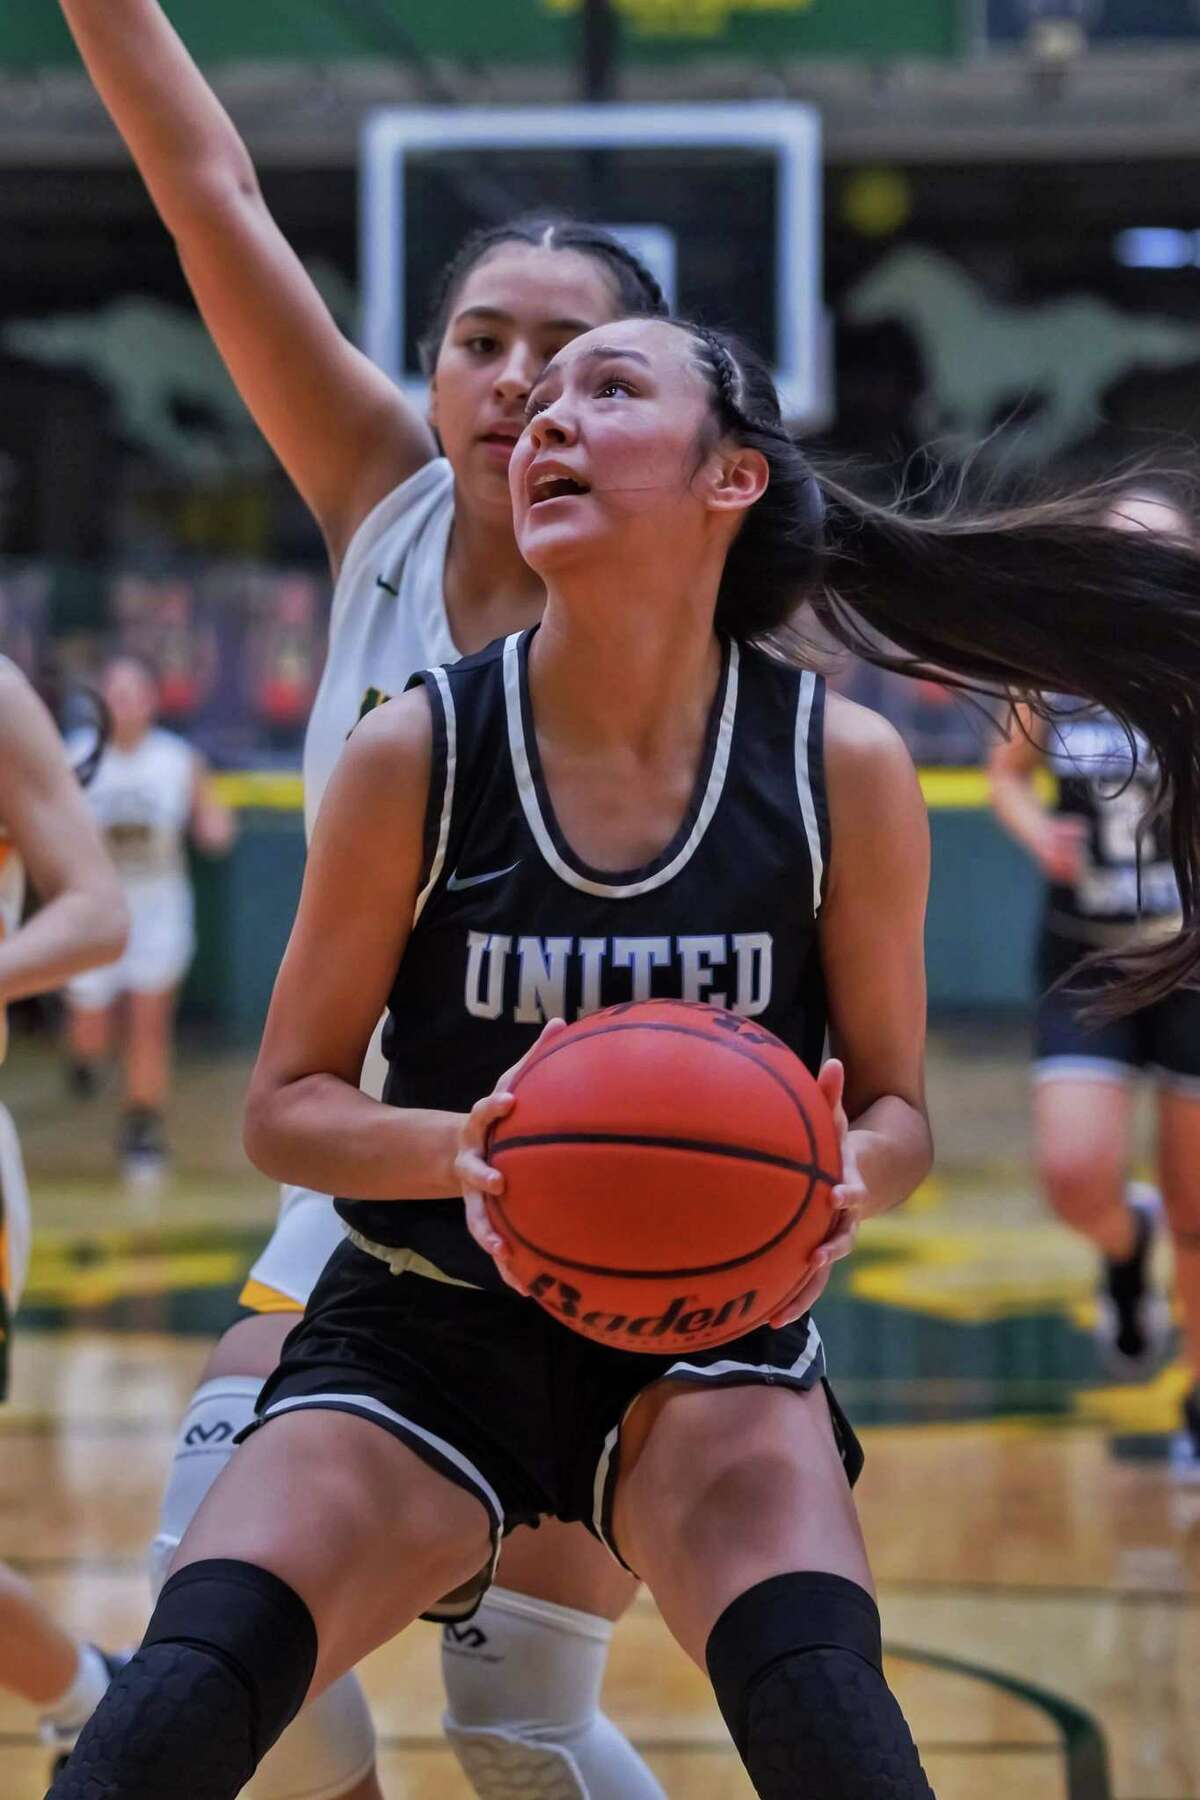 The United South Lady Panthers are set to face off against the Alexander Lady Bulldogs on Monday